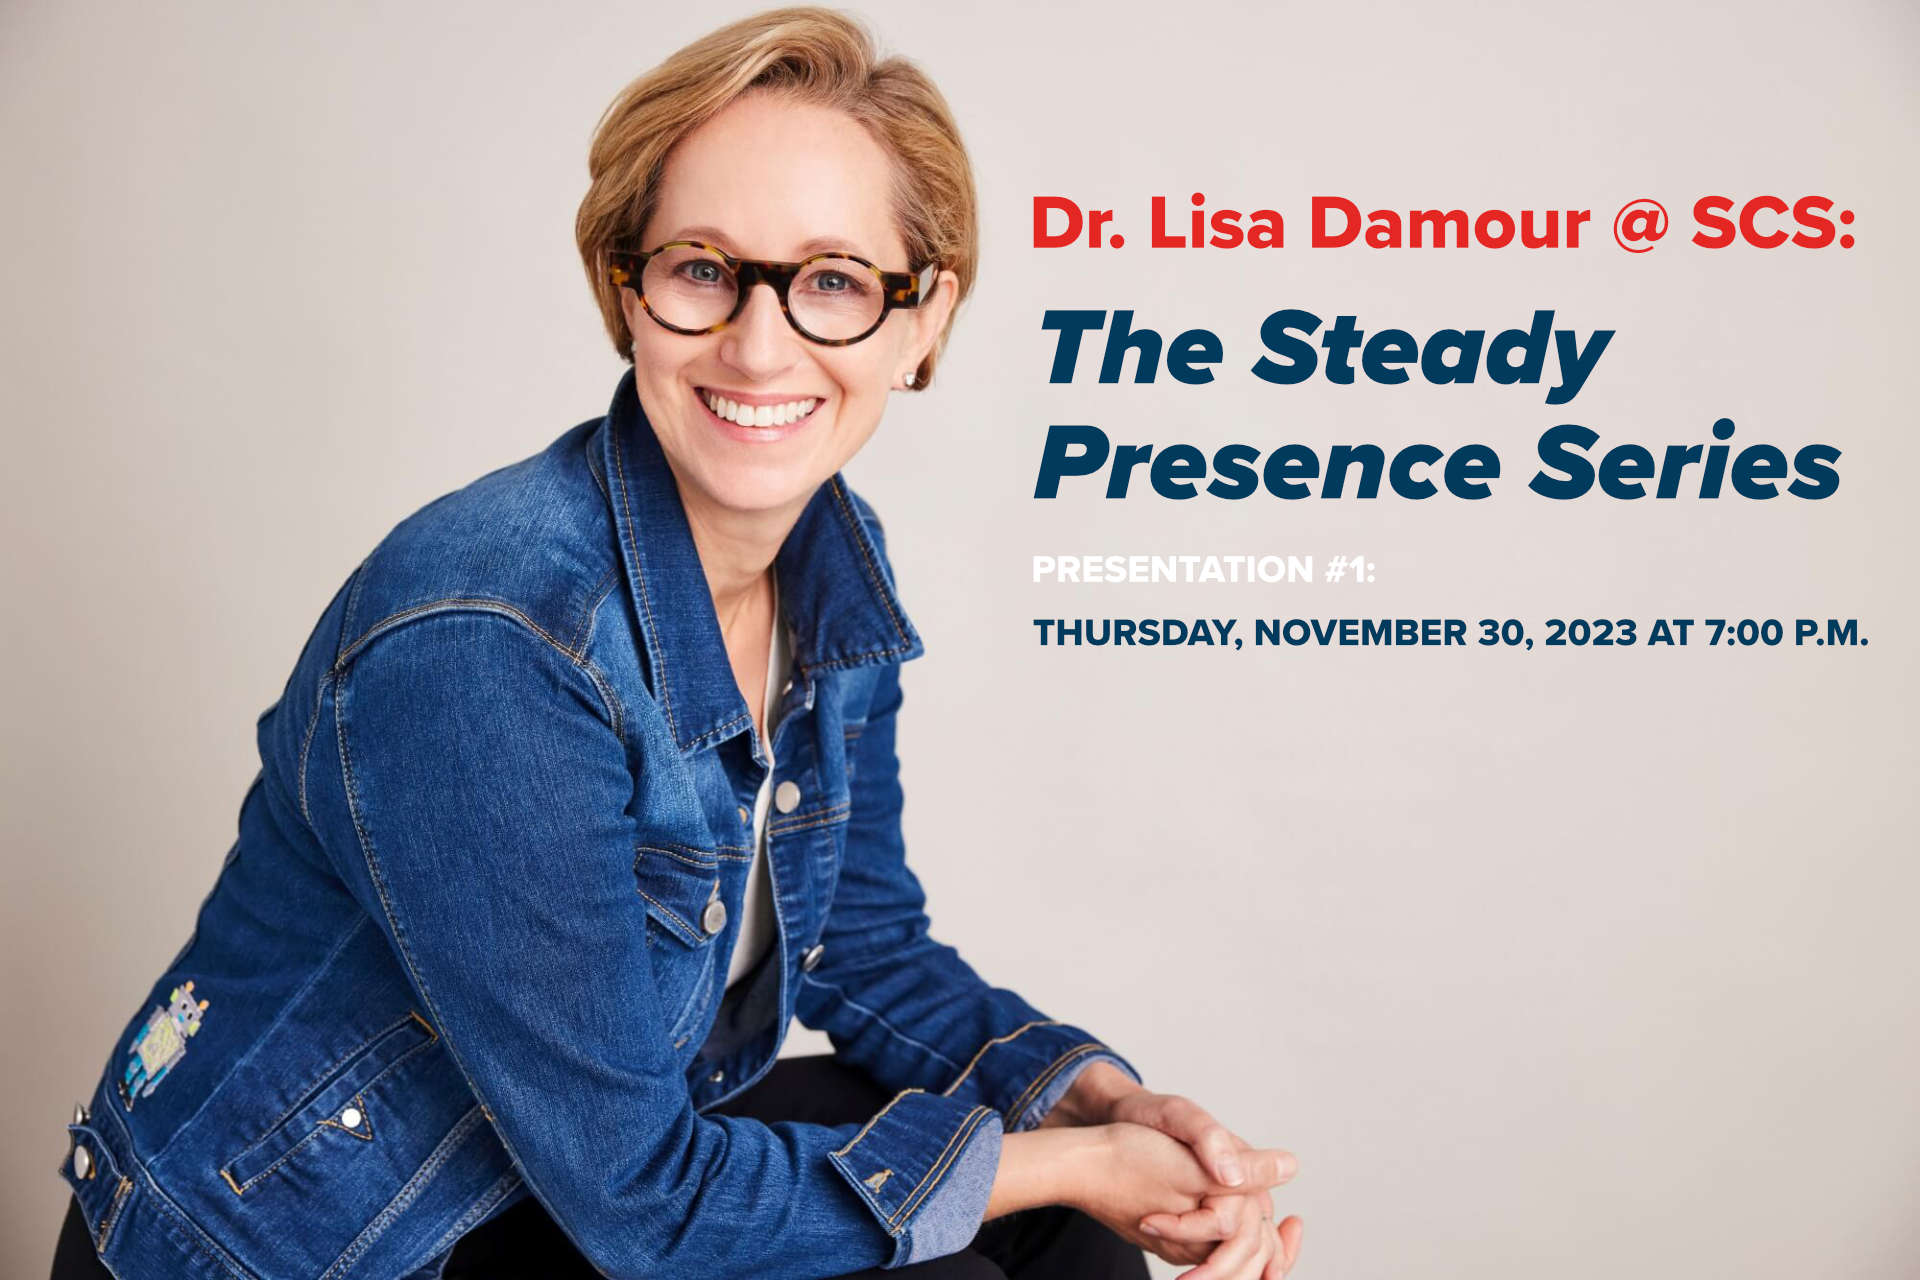 An evening with Lisa Damour